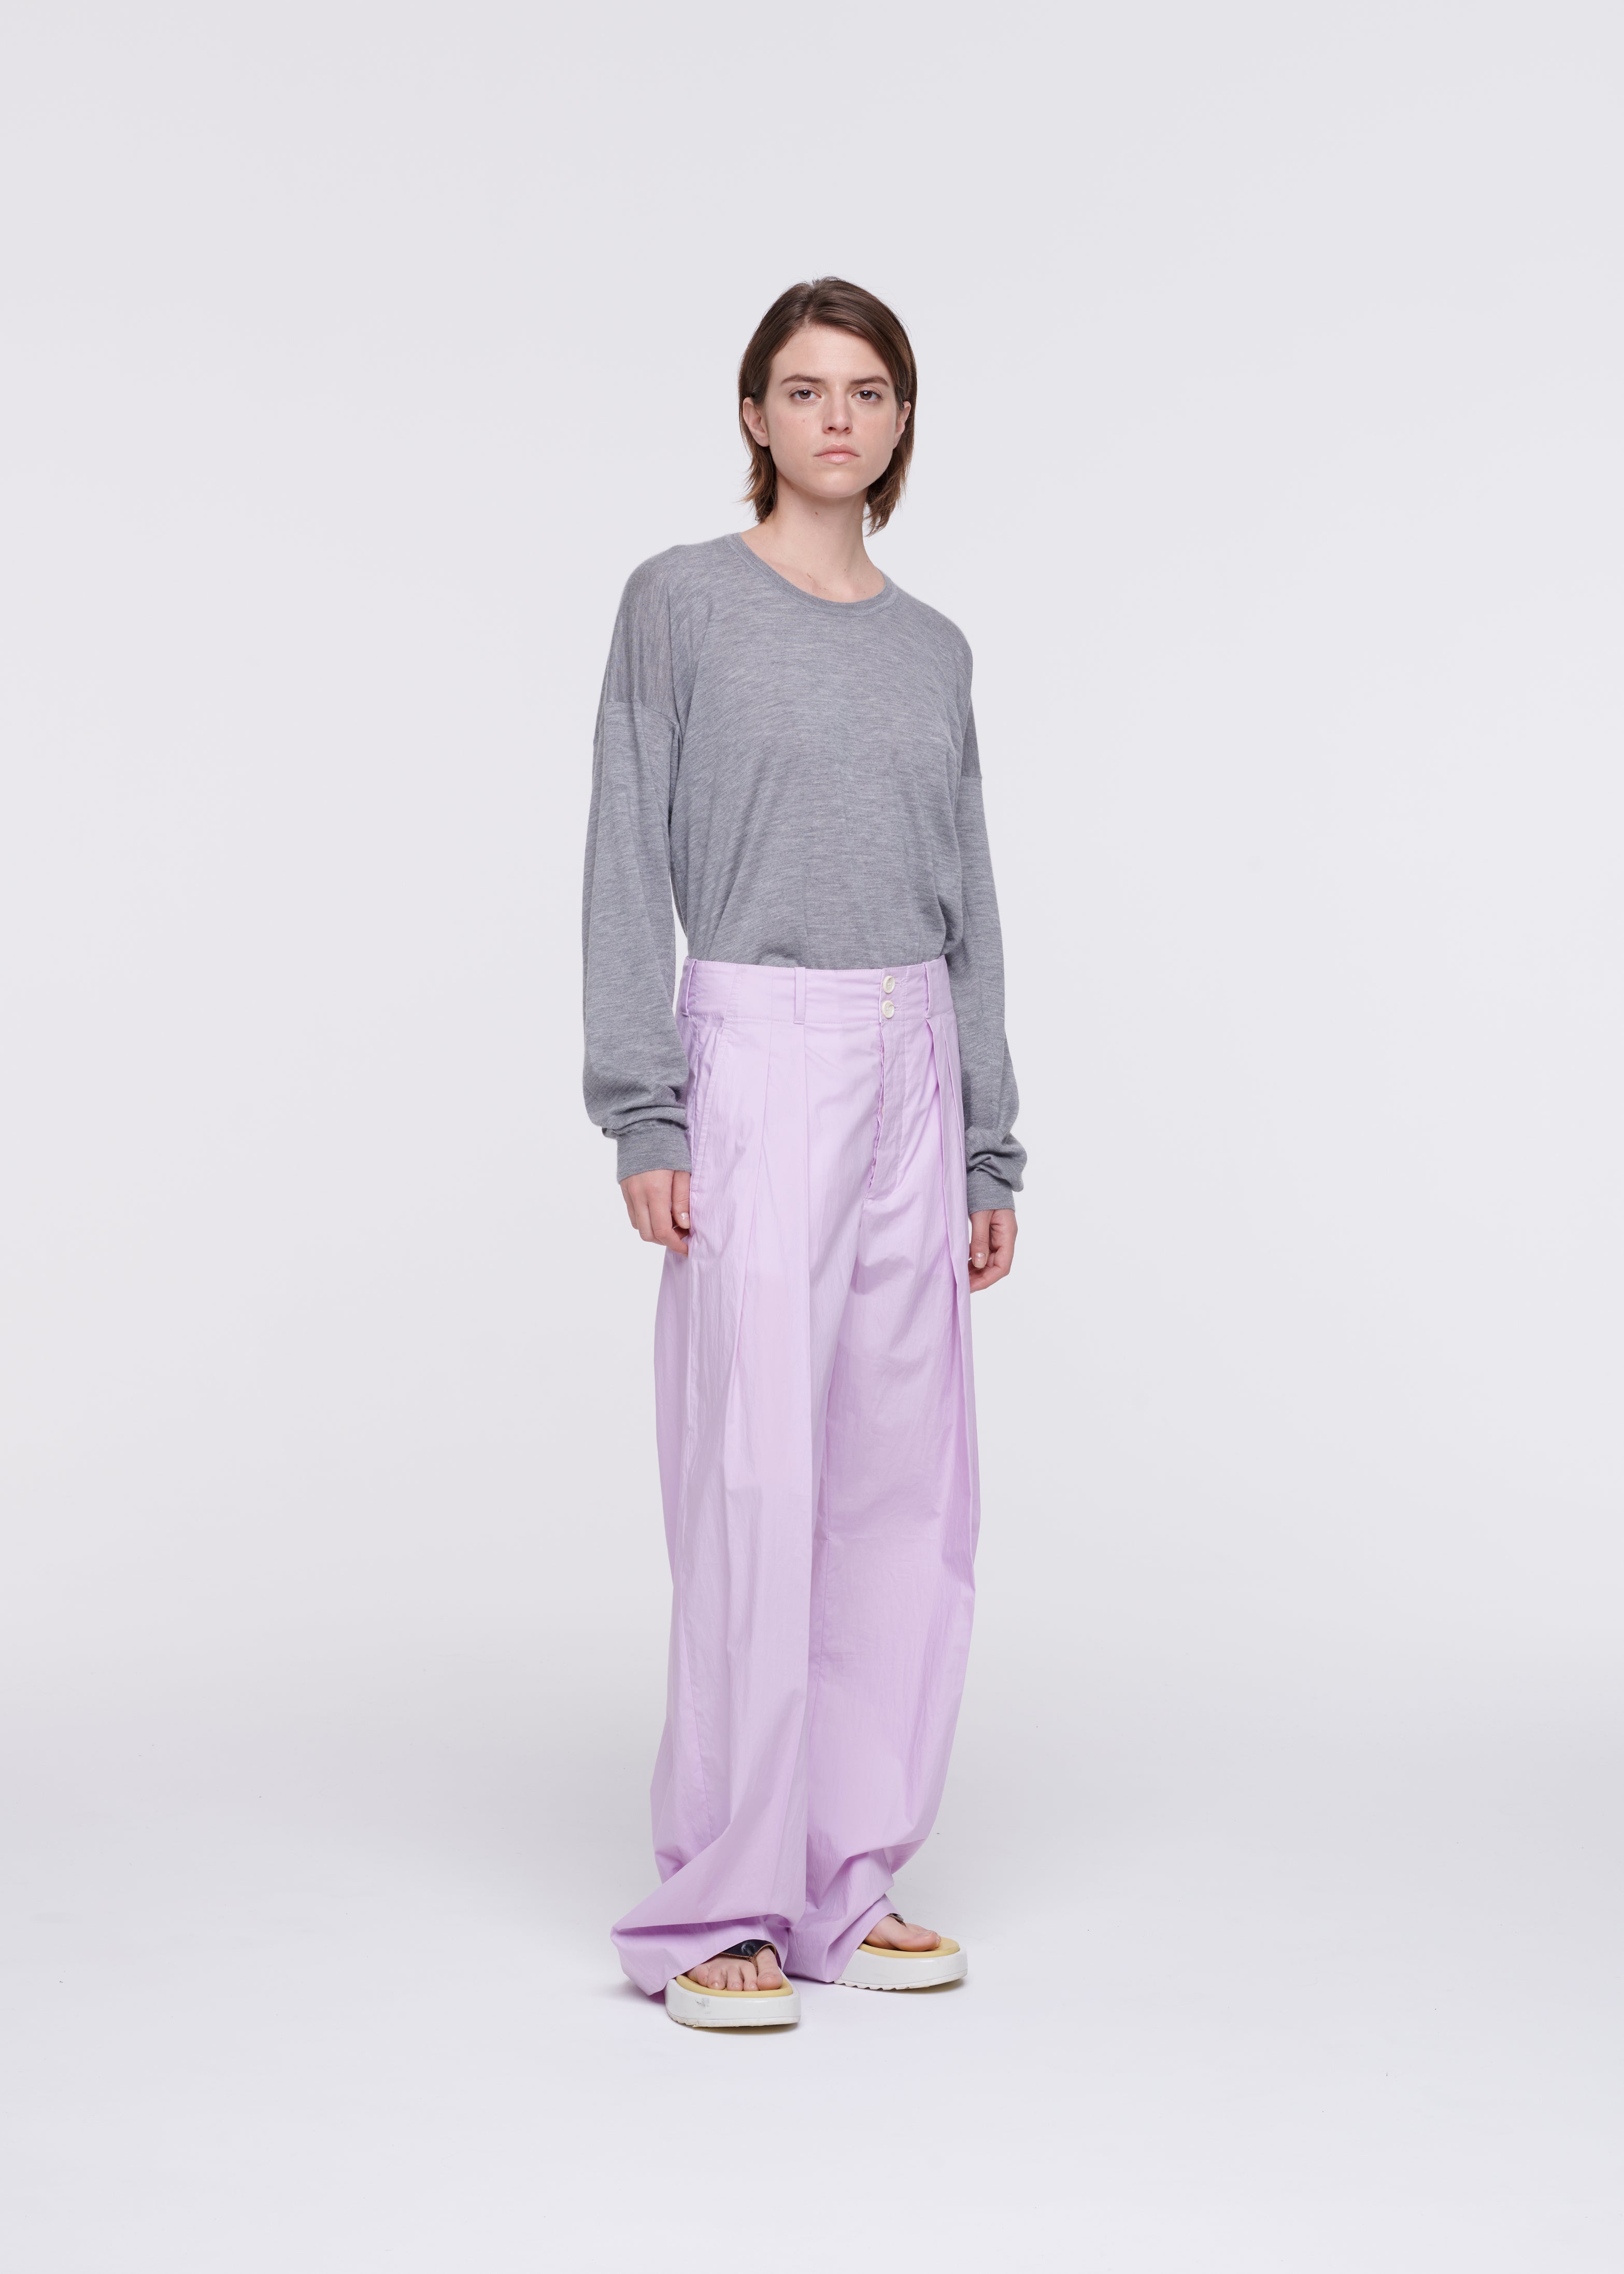 PLEATED LILAC WIDE LEG PANTS